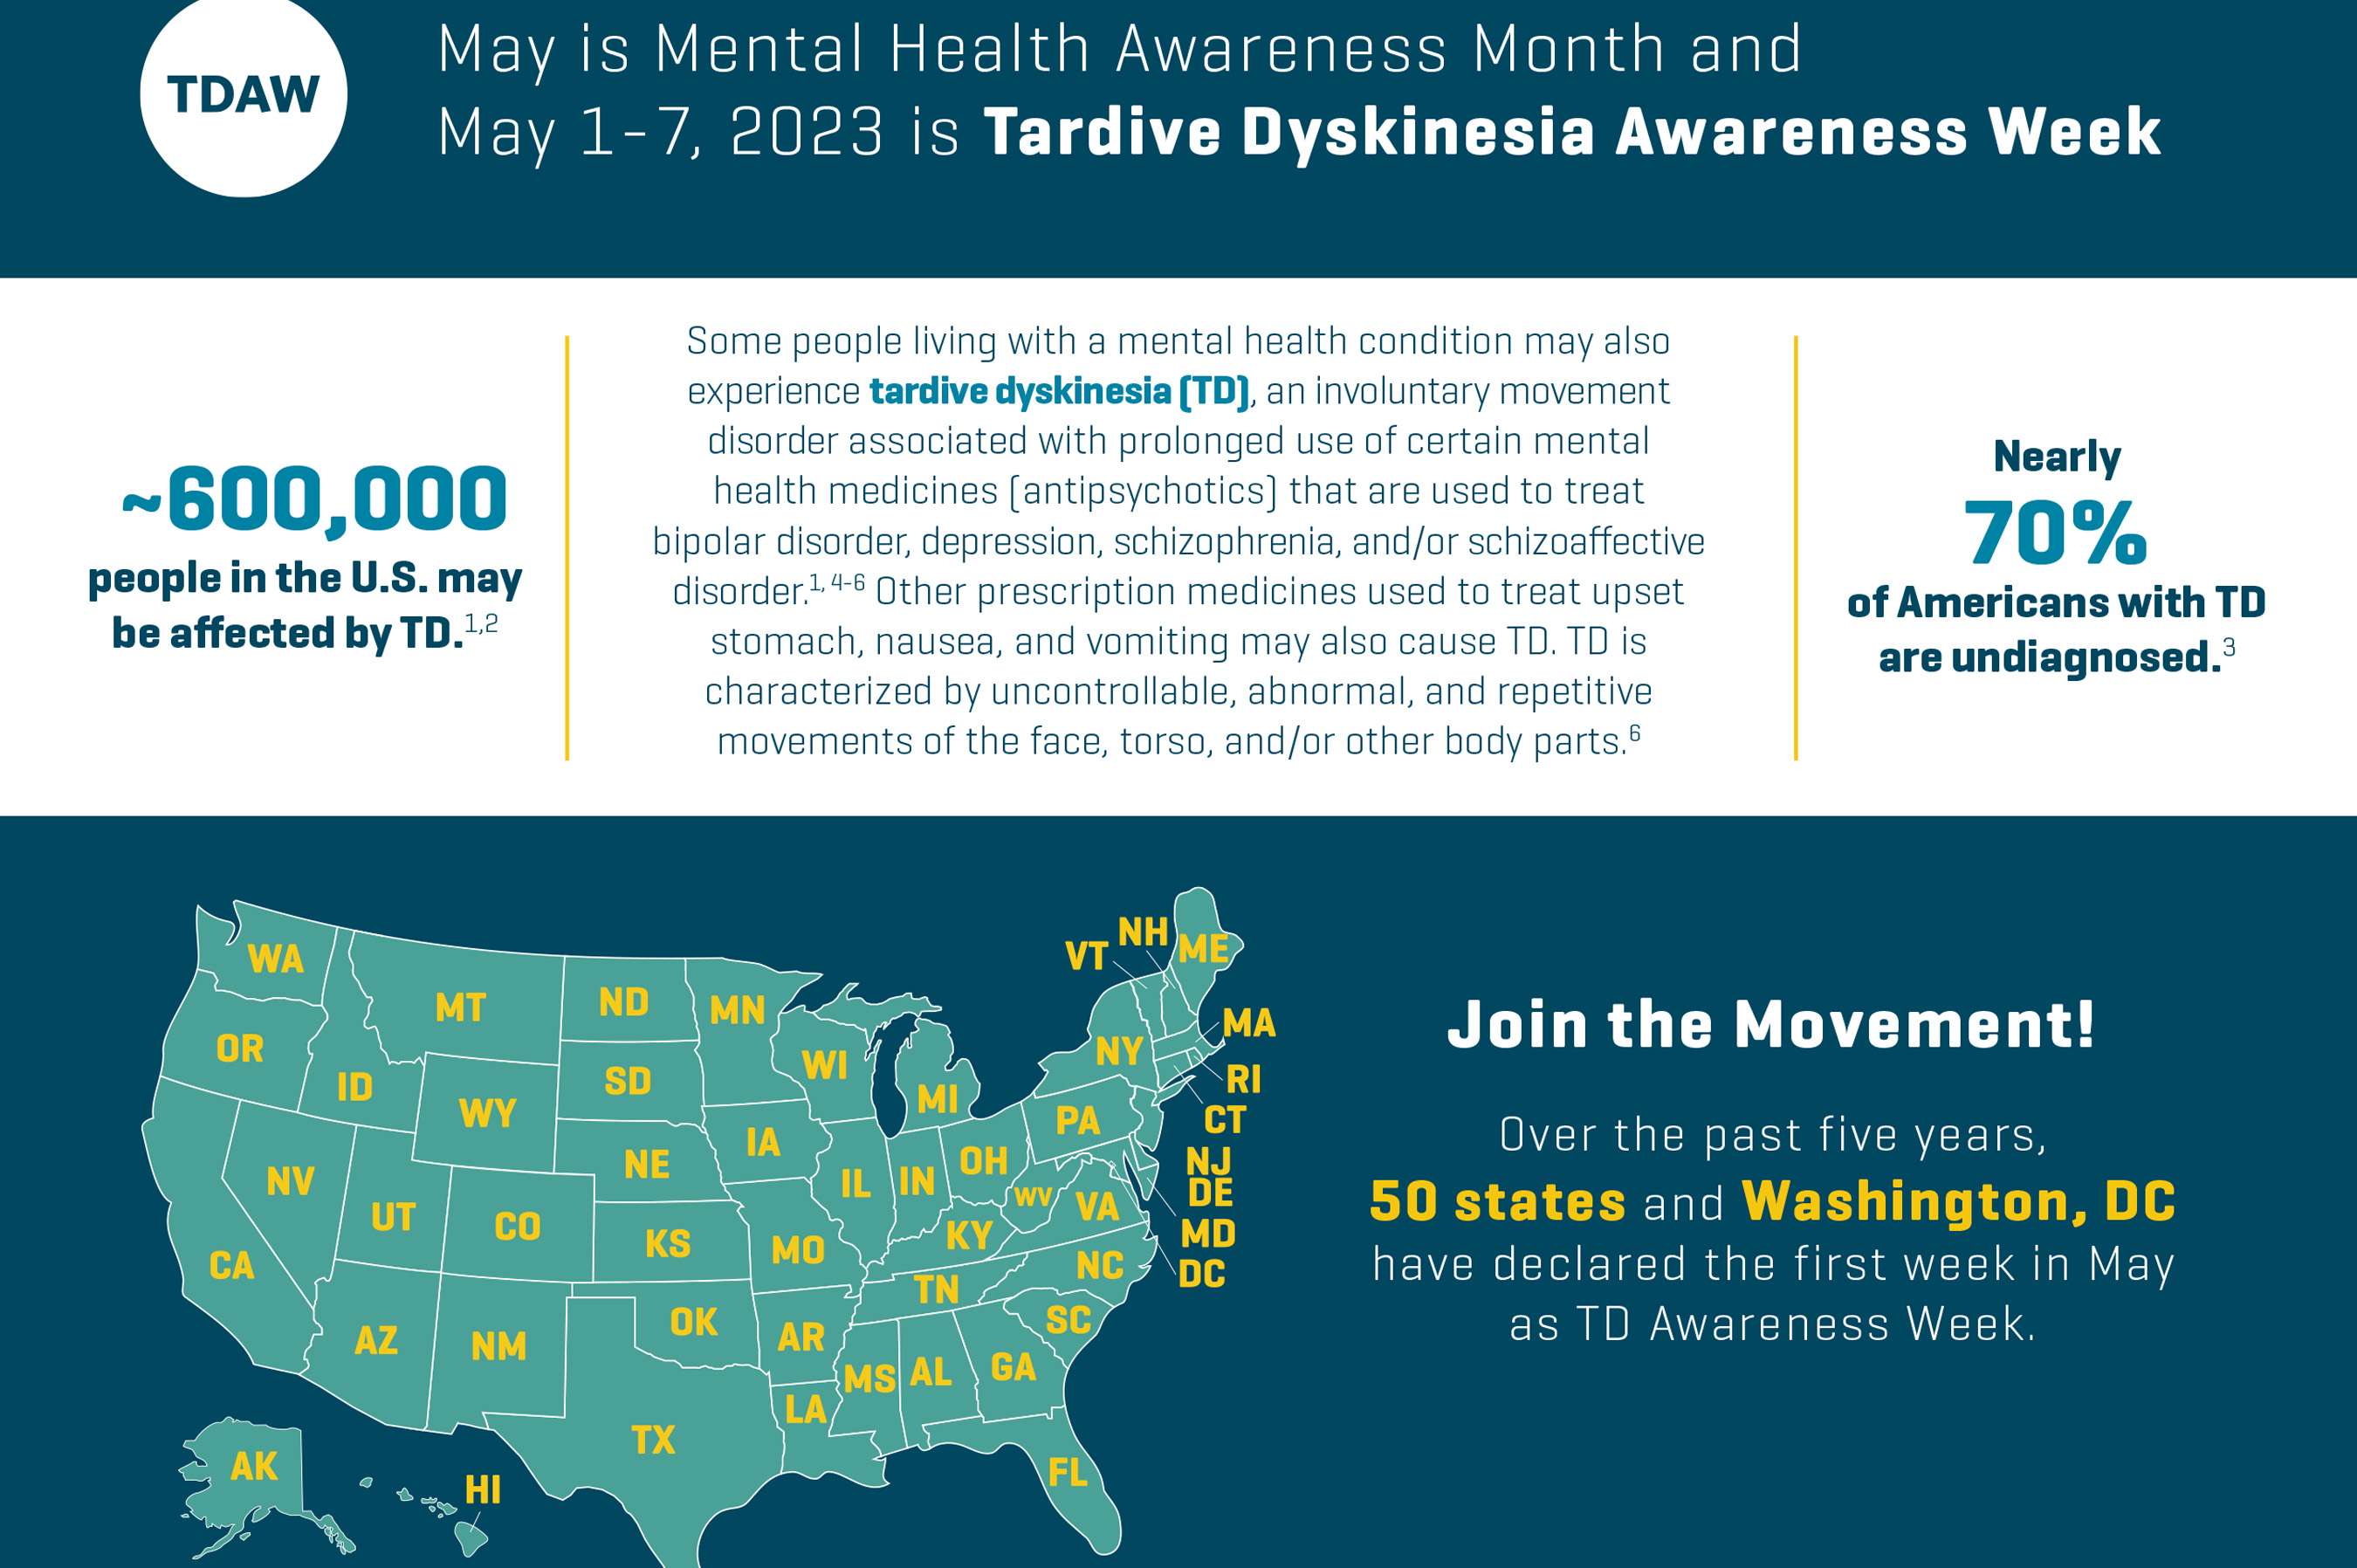 Over the past five years, 50 states and Washington, DC have declared the first week in May as TD Awareness Week.